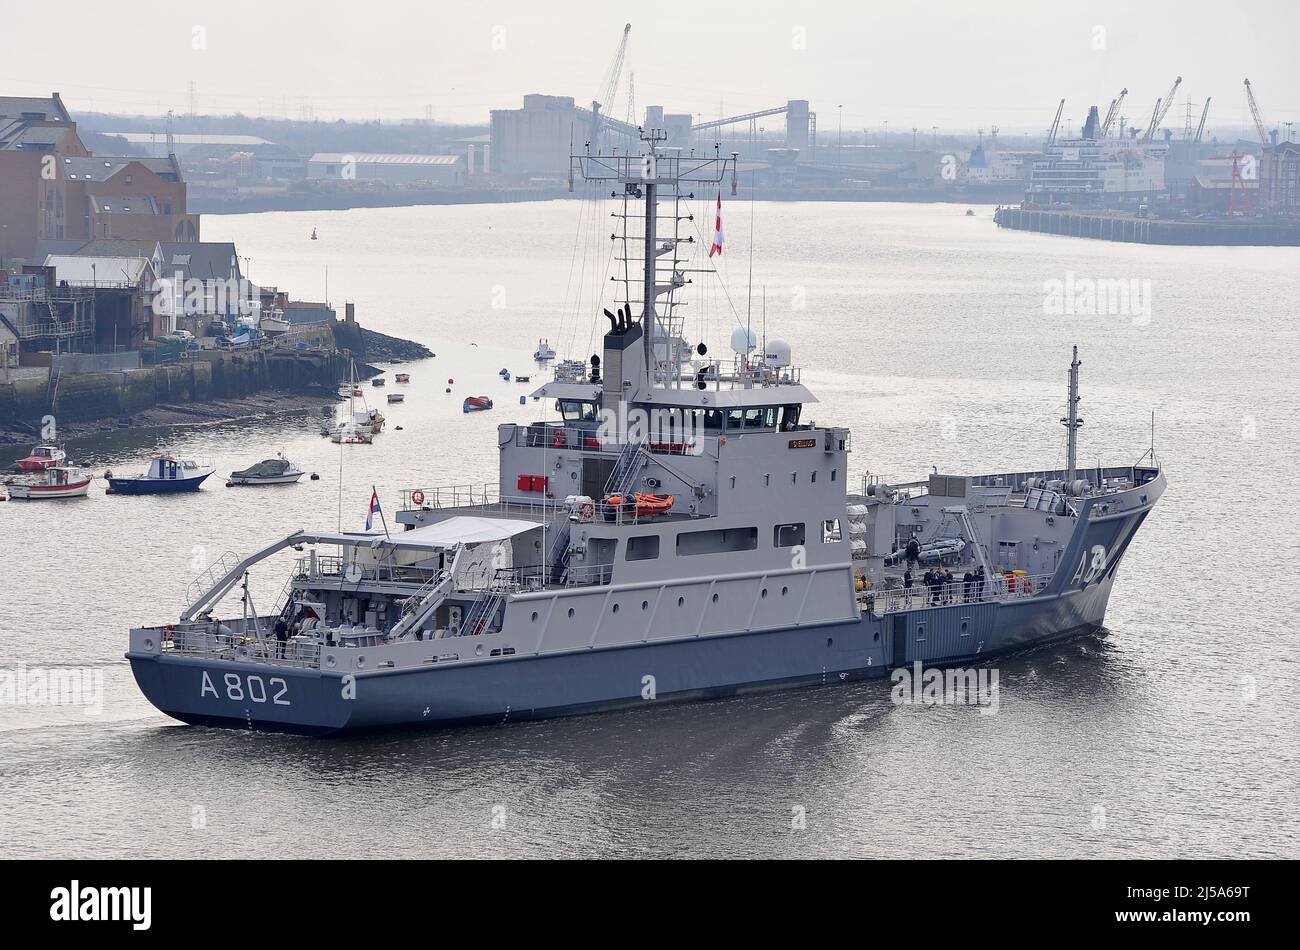 AJAXNETPHOTO. 24TH MARCH, 2022. TYNESIDE, NEWCASTLE, ENGLAND. - DUTCH NAVY SURVEY SHIP - HNLMS SNELLIUS (A802) 1875 TONS ENTERING THE RIVER TYNE. HYDROGRAPHIC SURVEY SHIP BULIT BY DAMEN SHIPYARD IN 2003 ON ROMANIAN HULL FITTED WITH FARSOUNDER FORWARD LOOKING SONAR (FLS) ENABLING 3D ONBOARD CAPTURE OF SEABED DATA. PHOTO:TONY HOLLAND/AJAX REF:DTH222403 9542 Stock Photo